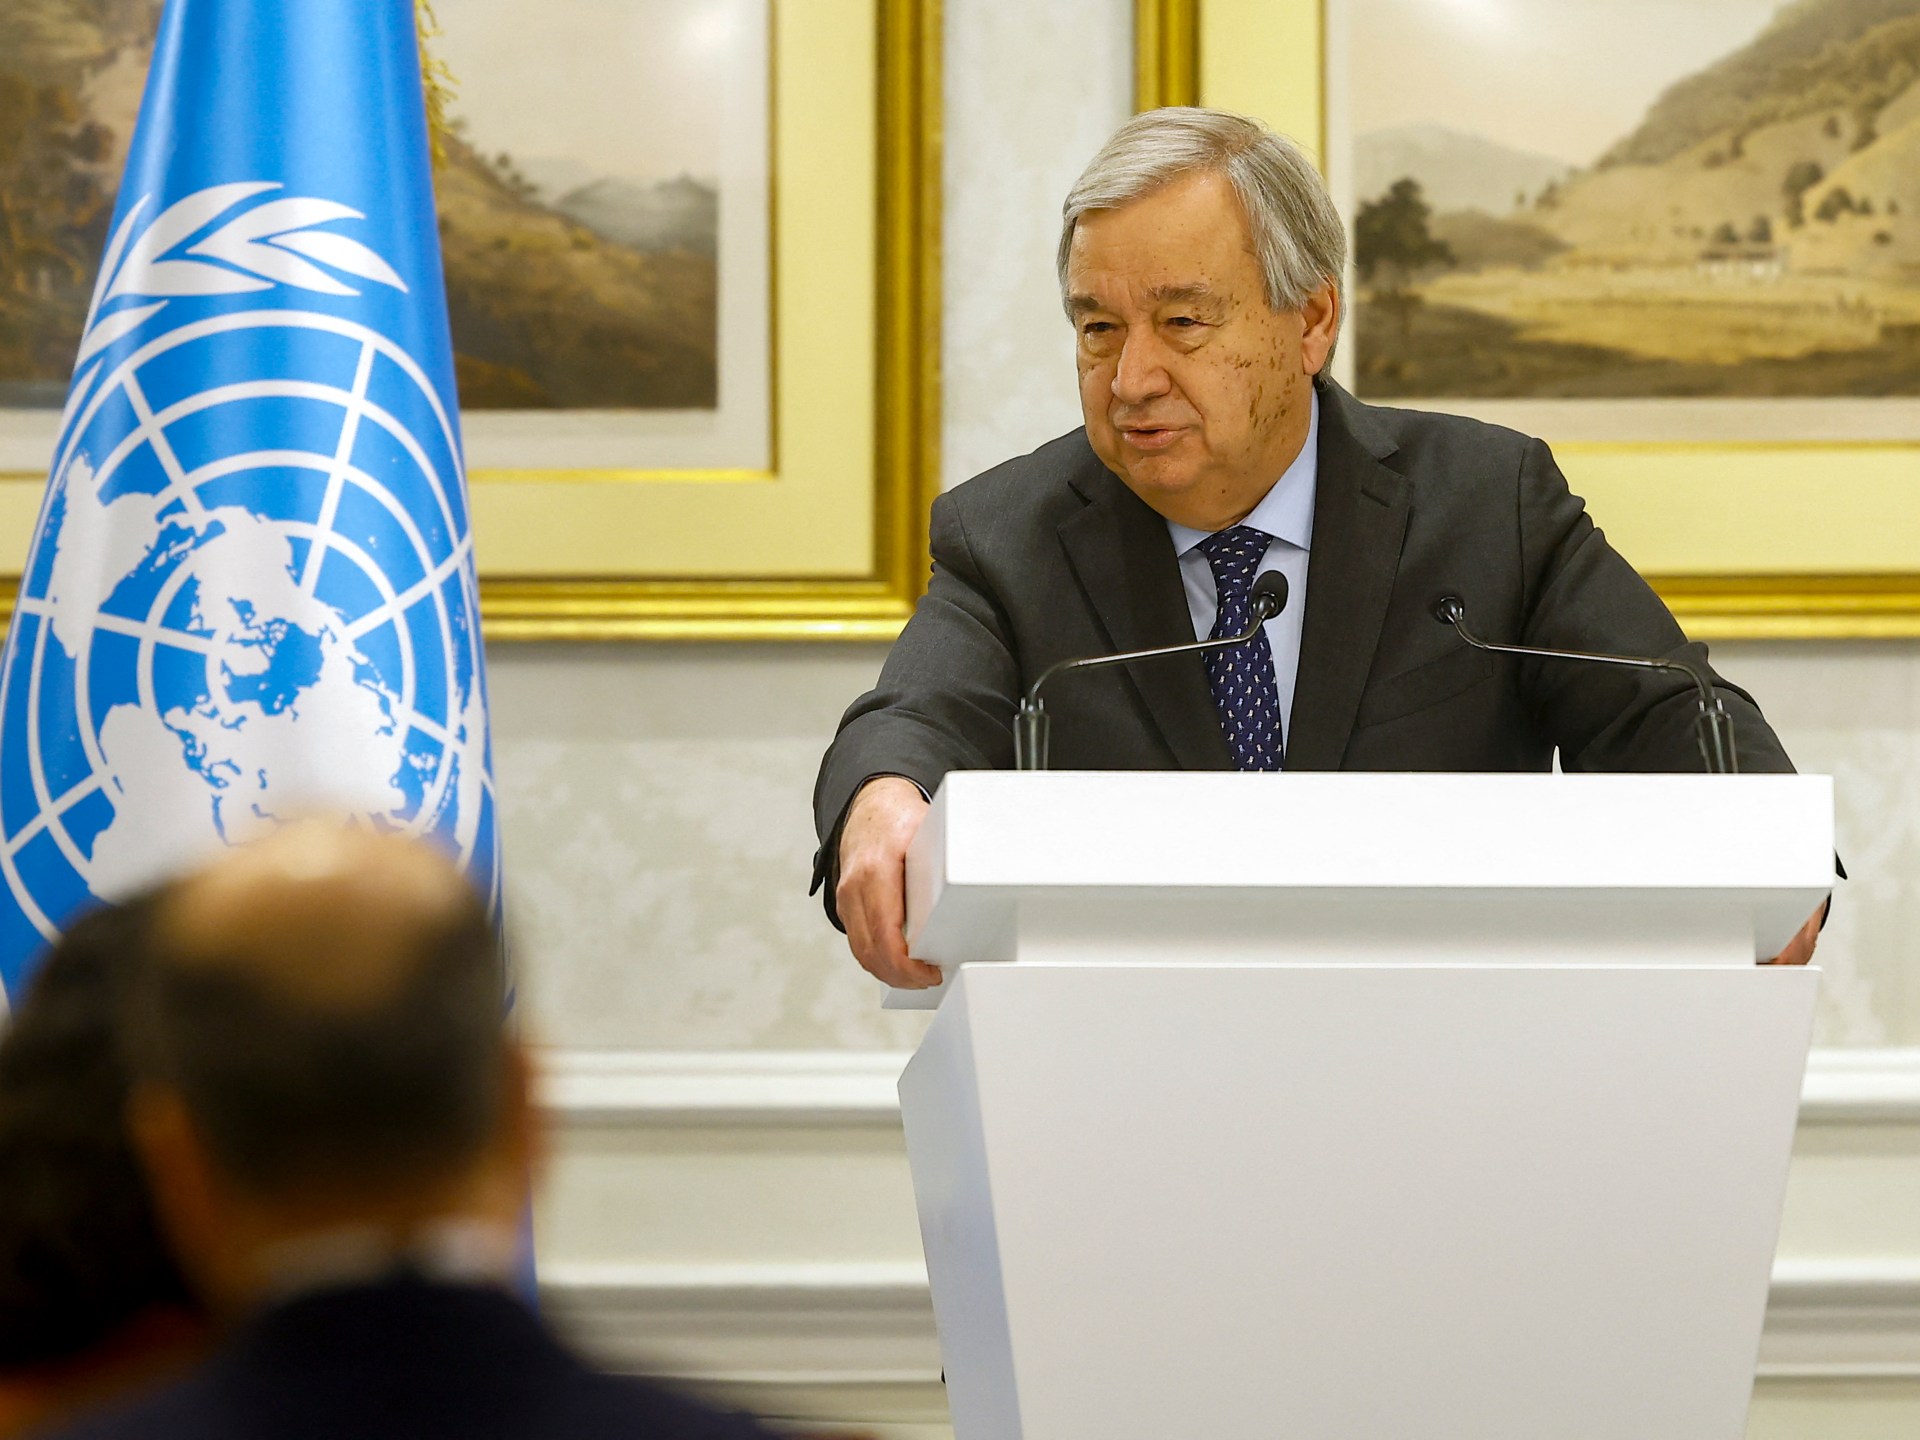 Taliban’s situations to attend UN assembly ‘unacceptable’, Guterres says | United Nations Information